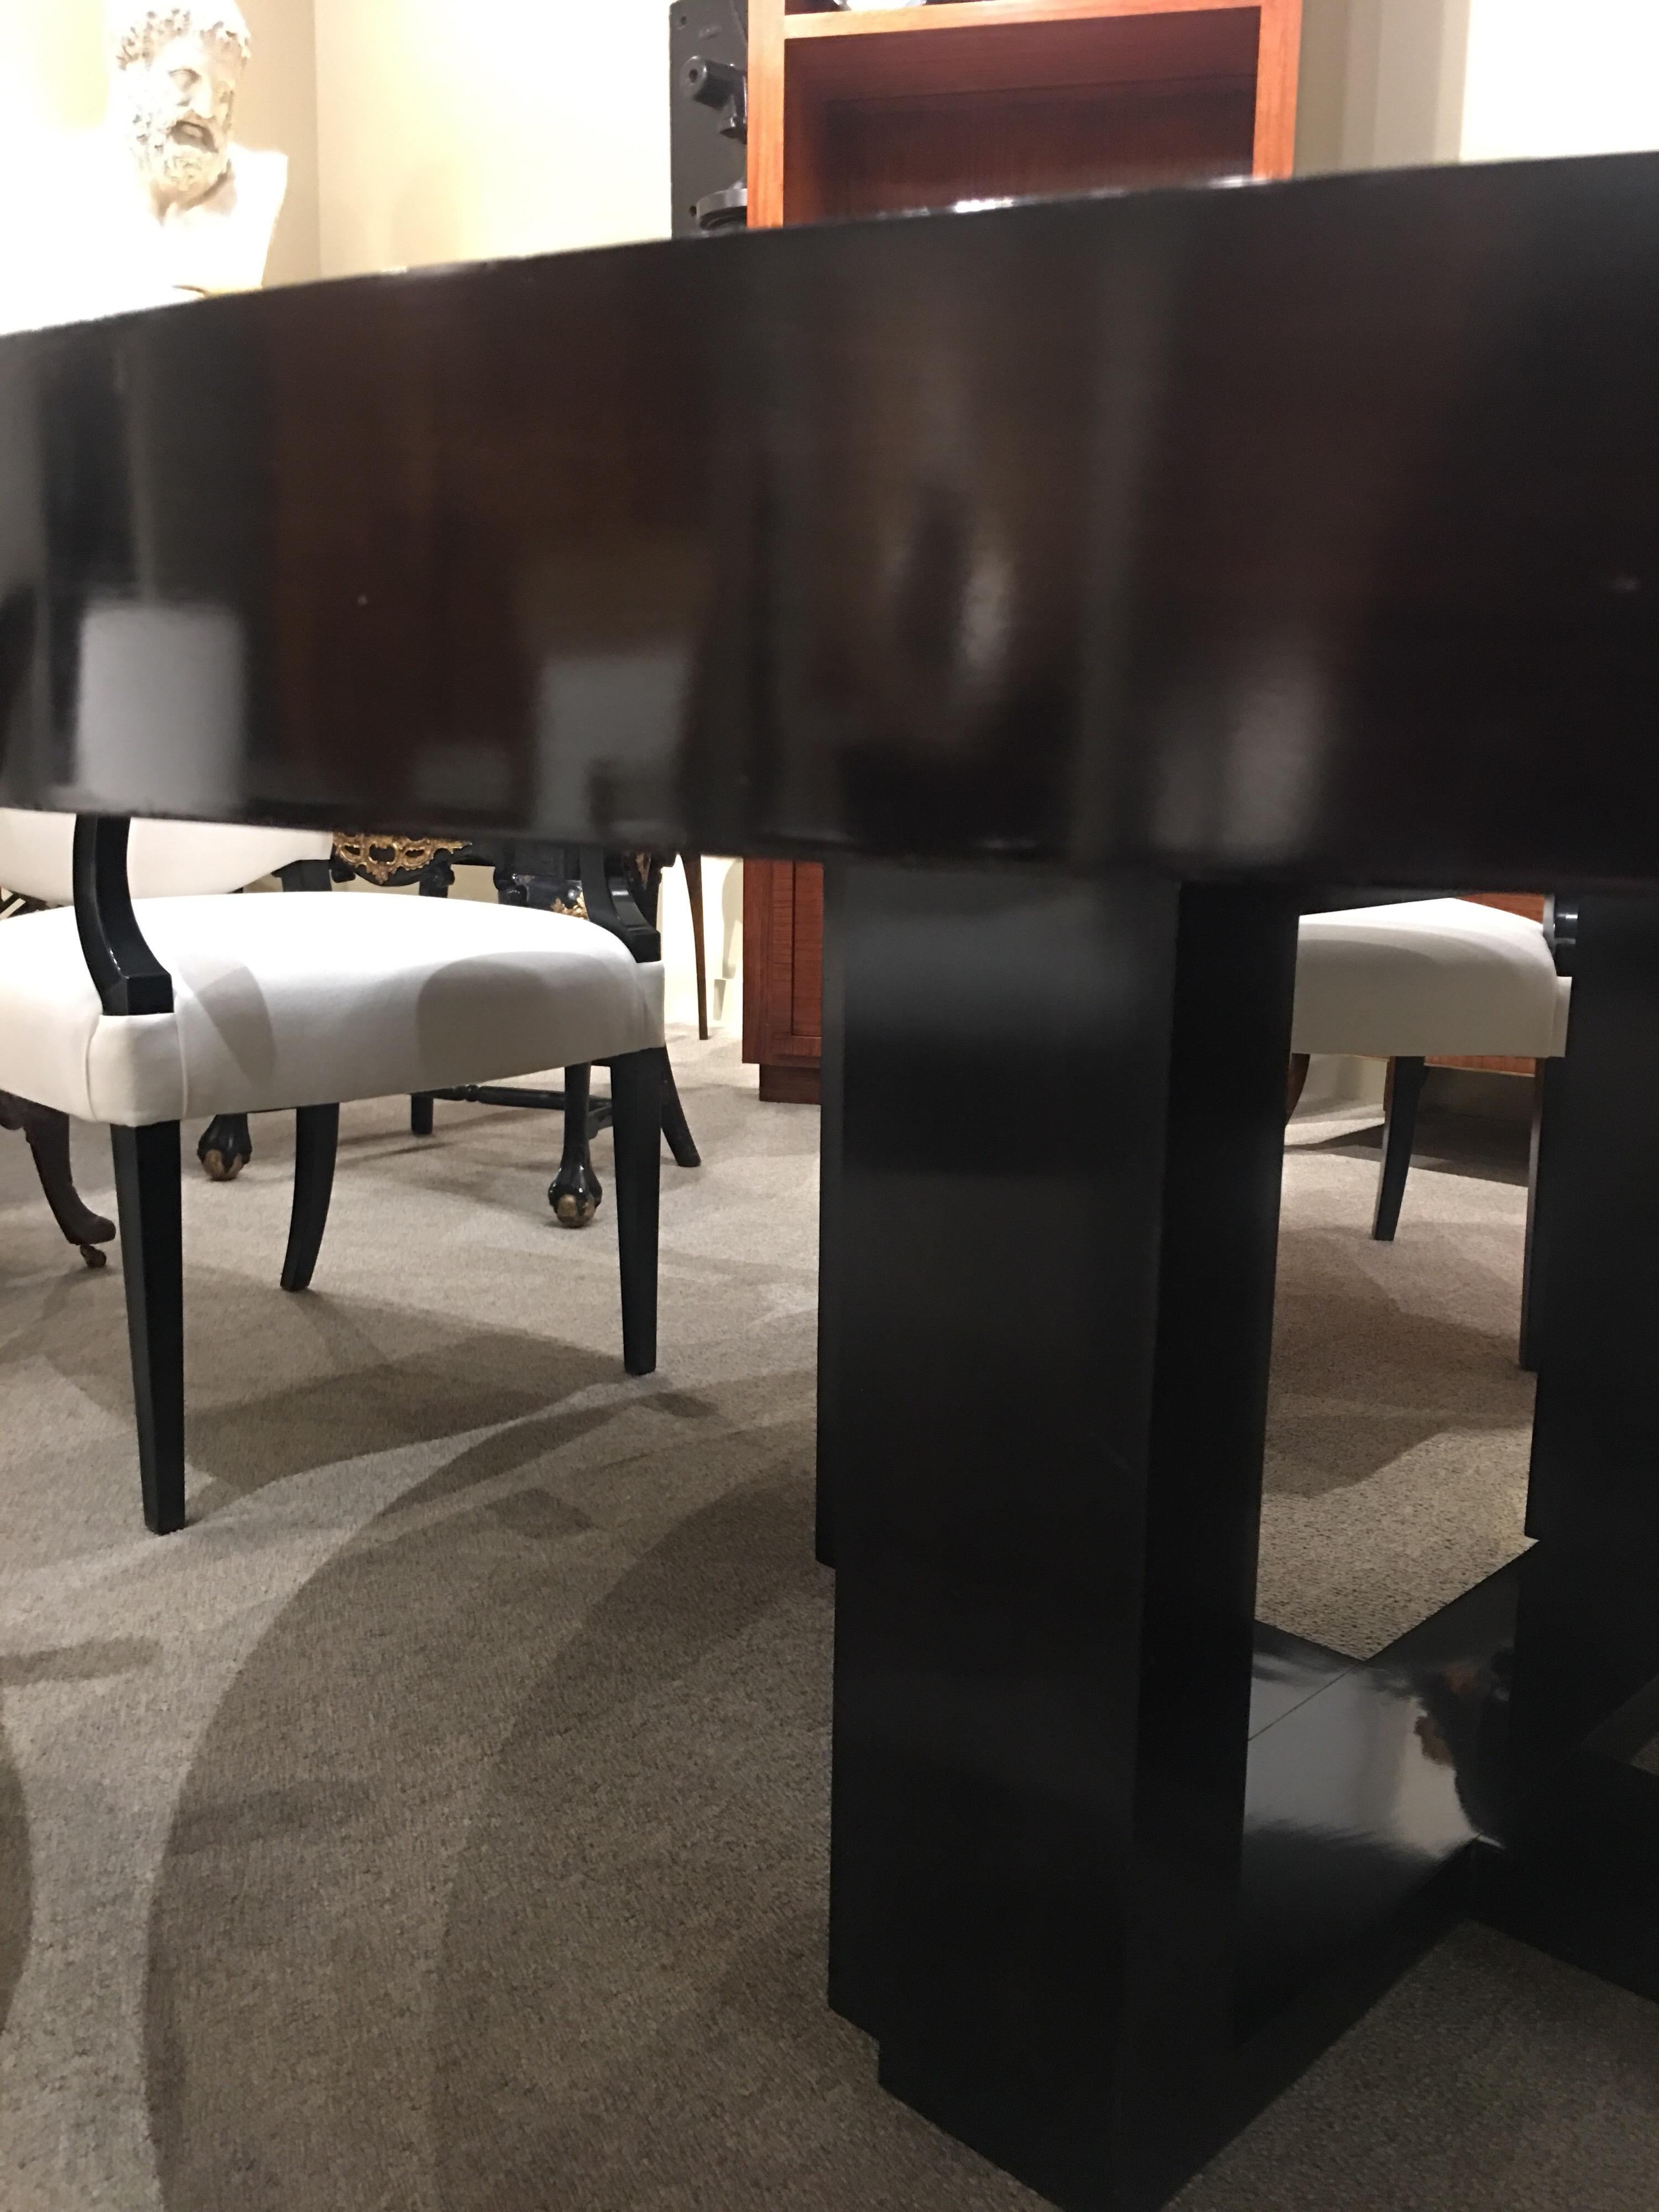 This round table features the sleek design of Mike Bell's Contemporary Line. Unlike the rectangular counterpart, this table visually reminds us of a circular pond. The table surface has been 